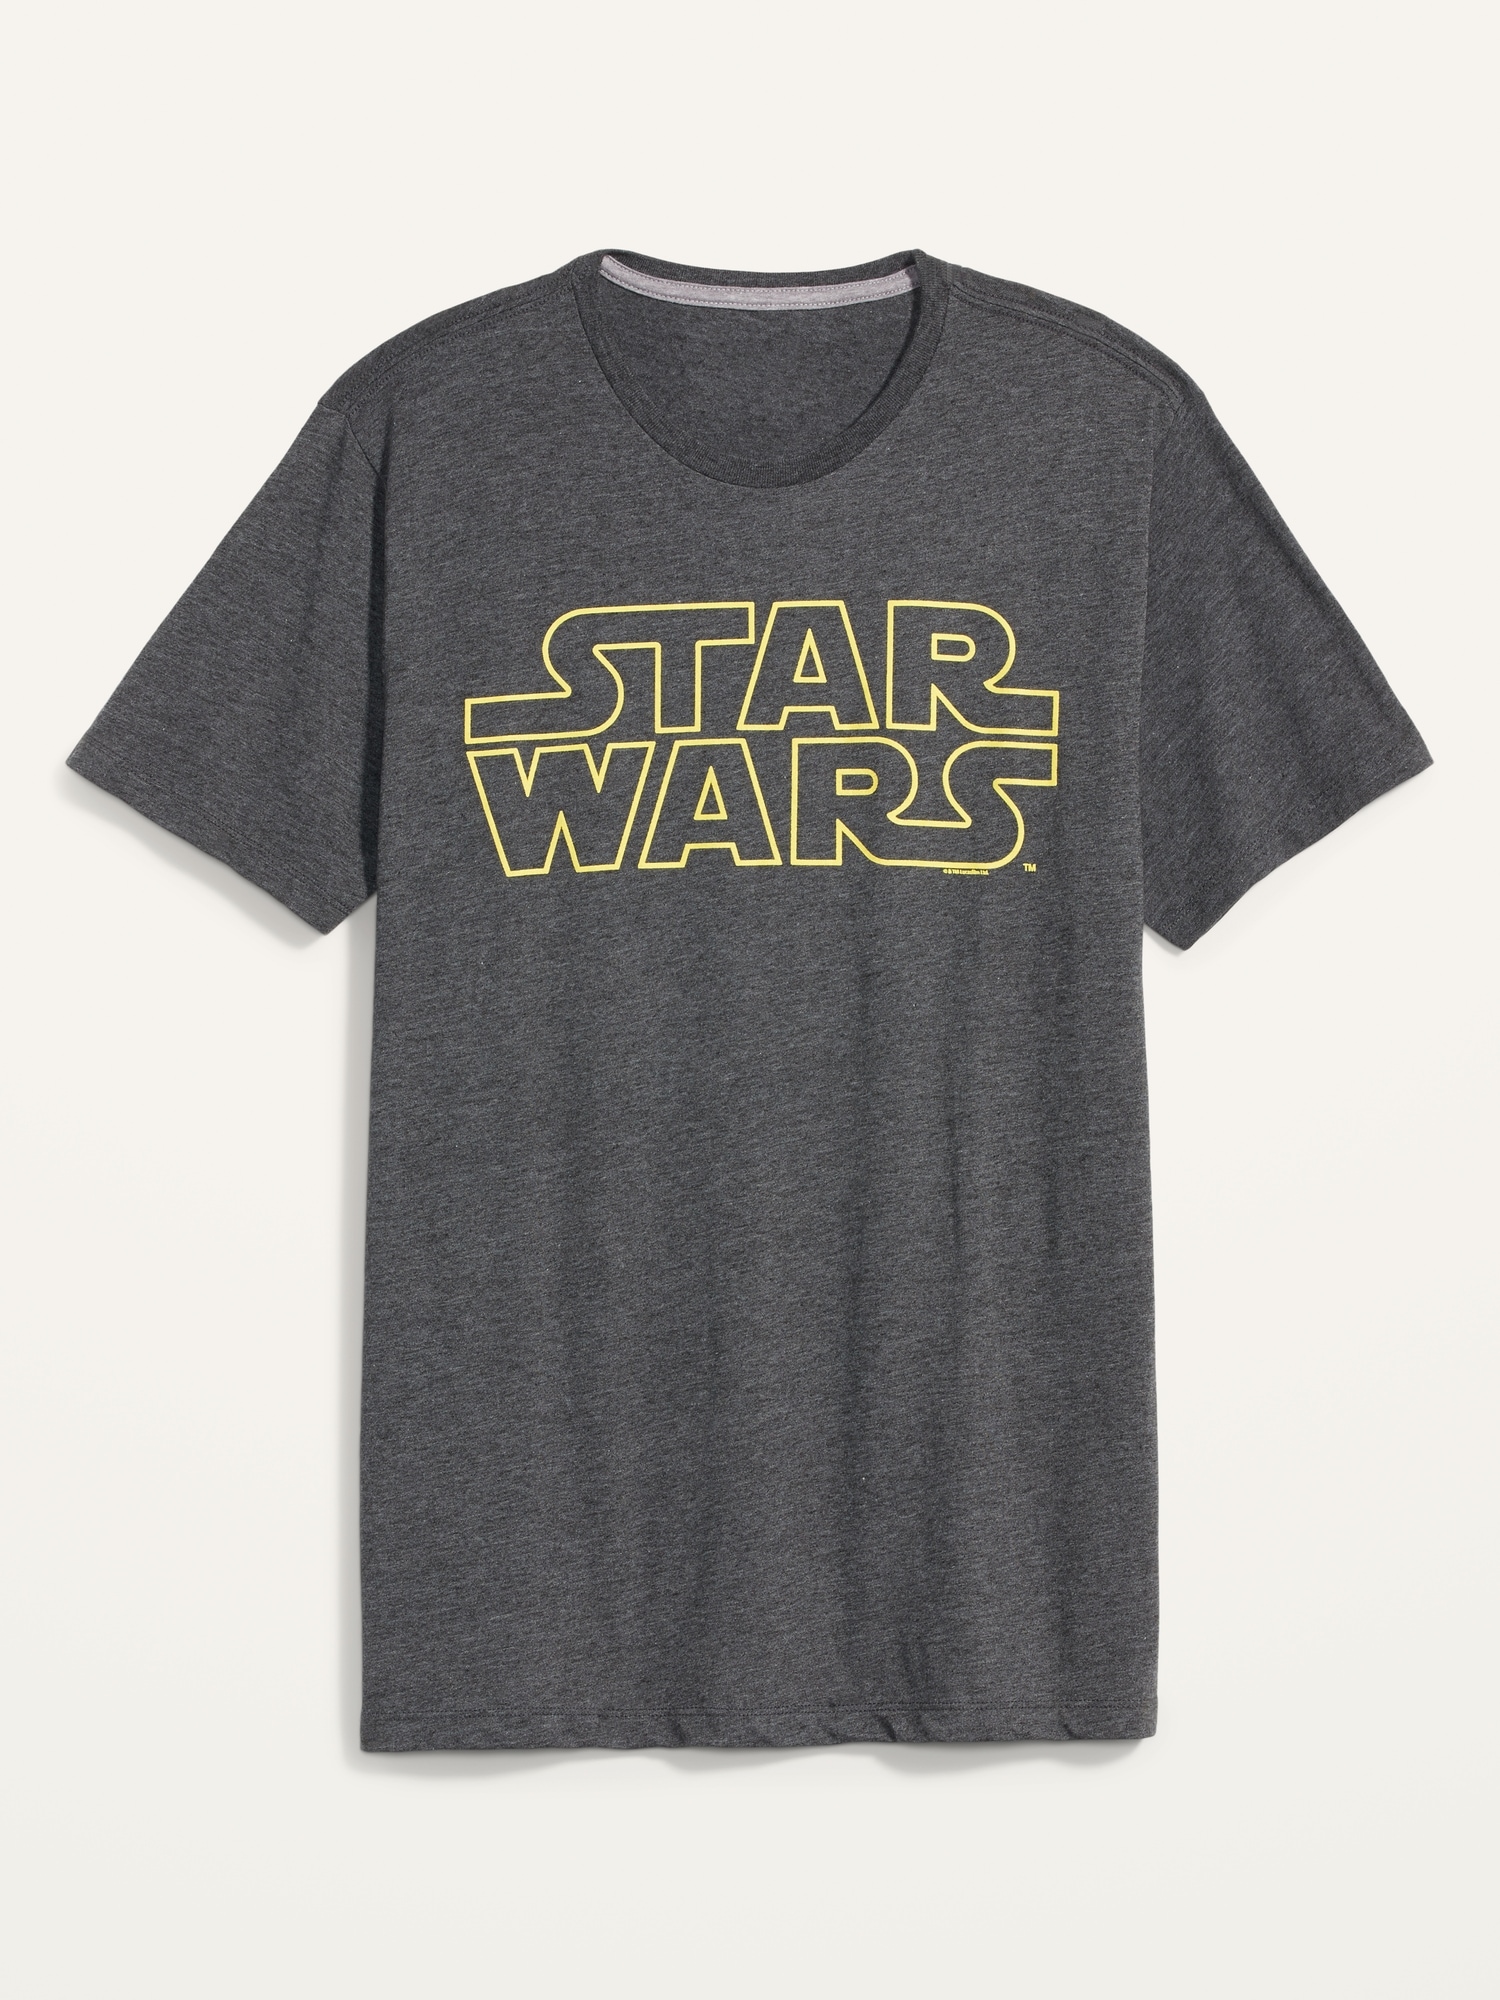 Star Wars™ Gender-Neutral Graphic T-Shirt for Adults